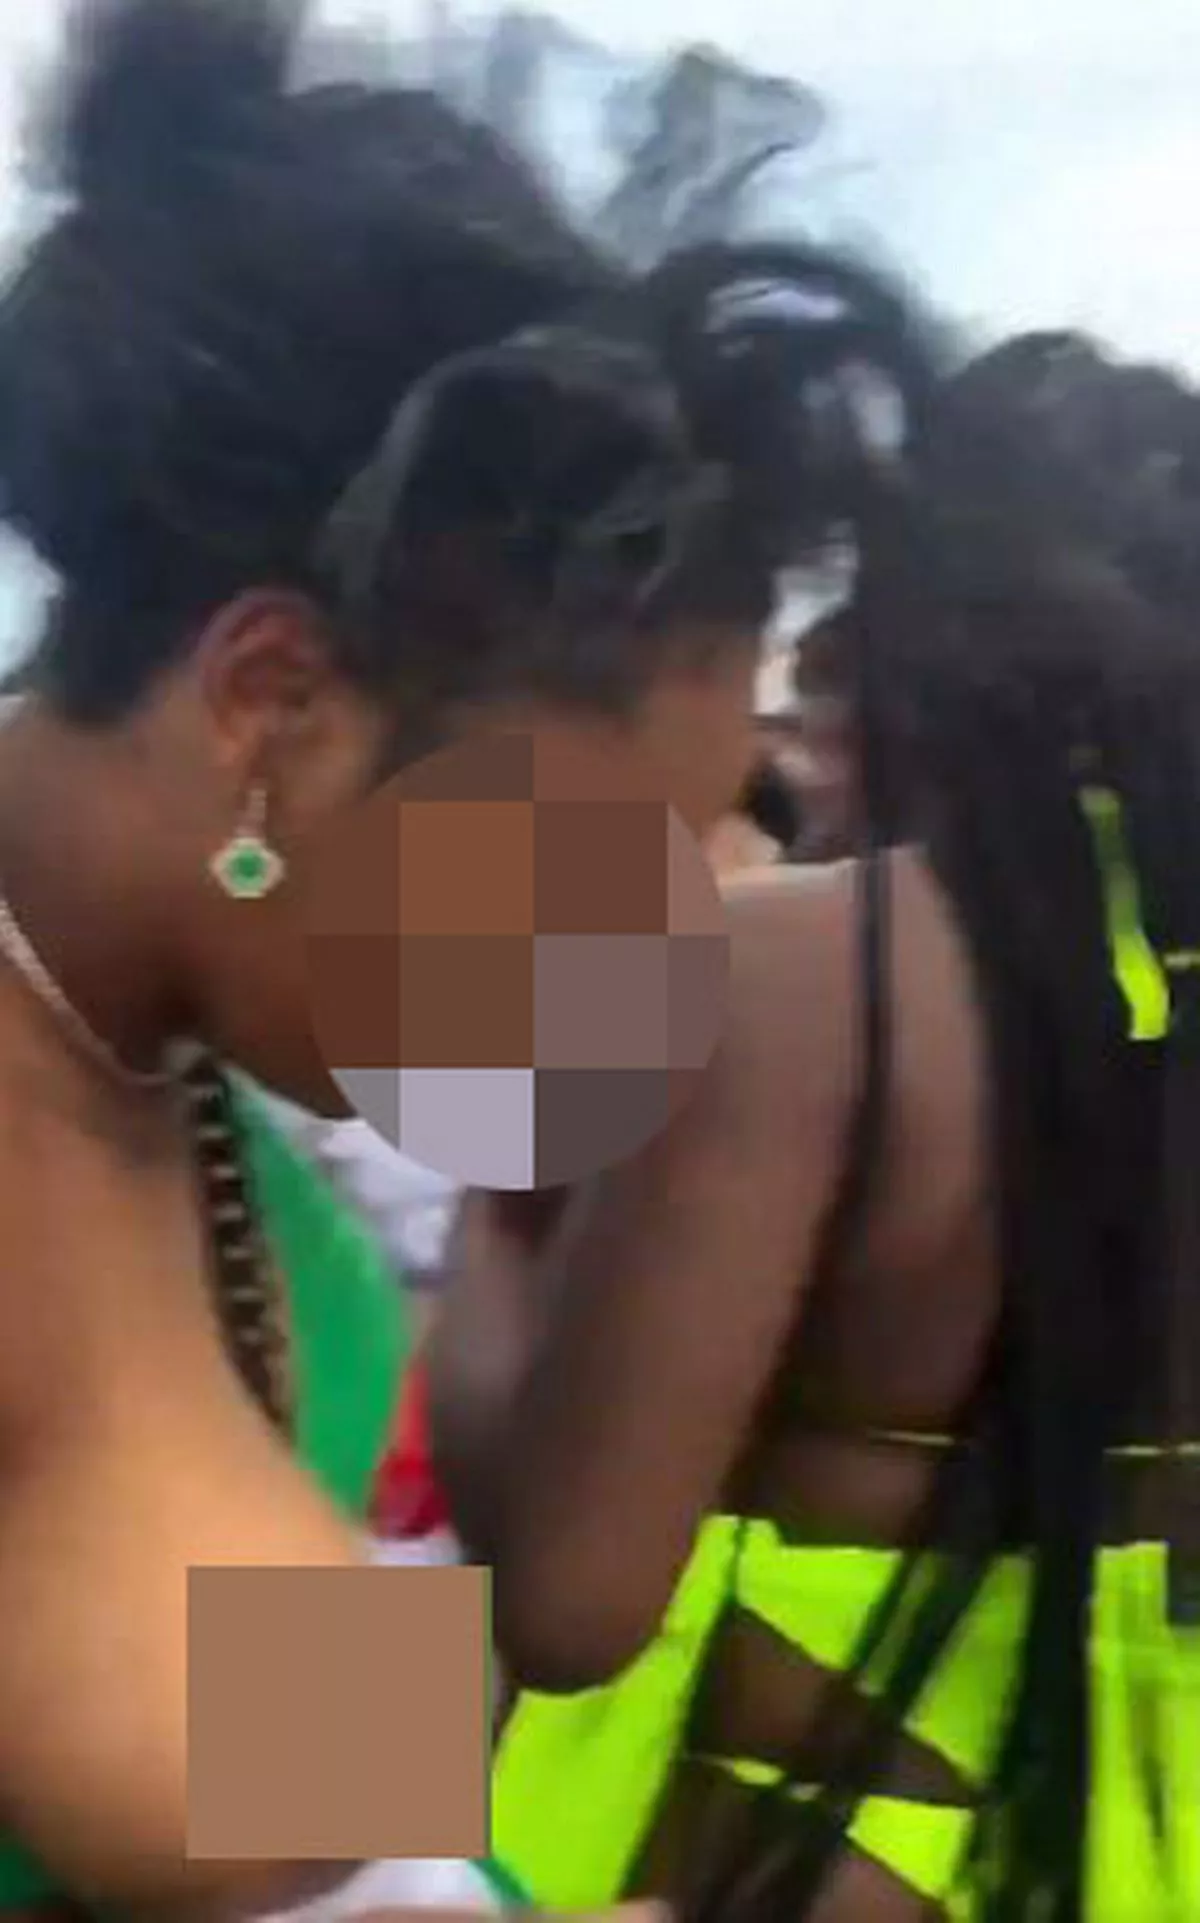 Breasts fall out of bikinis as women fight during spring break outing (photos/video)